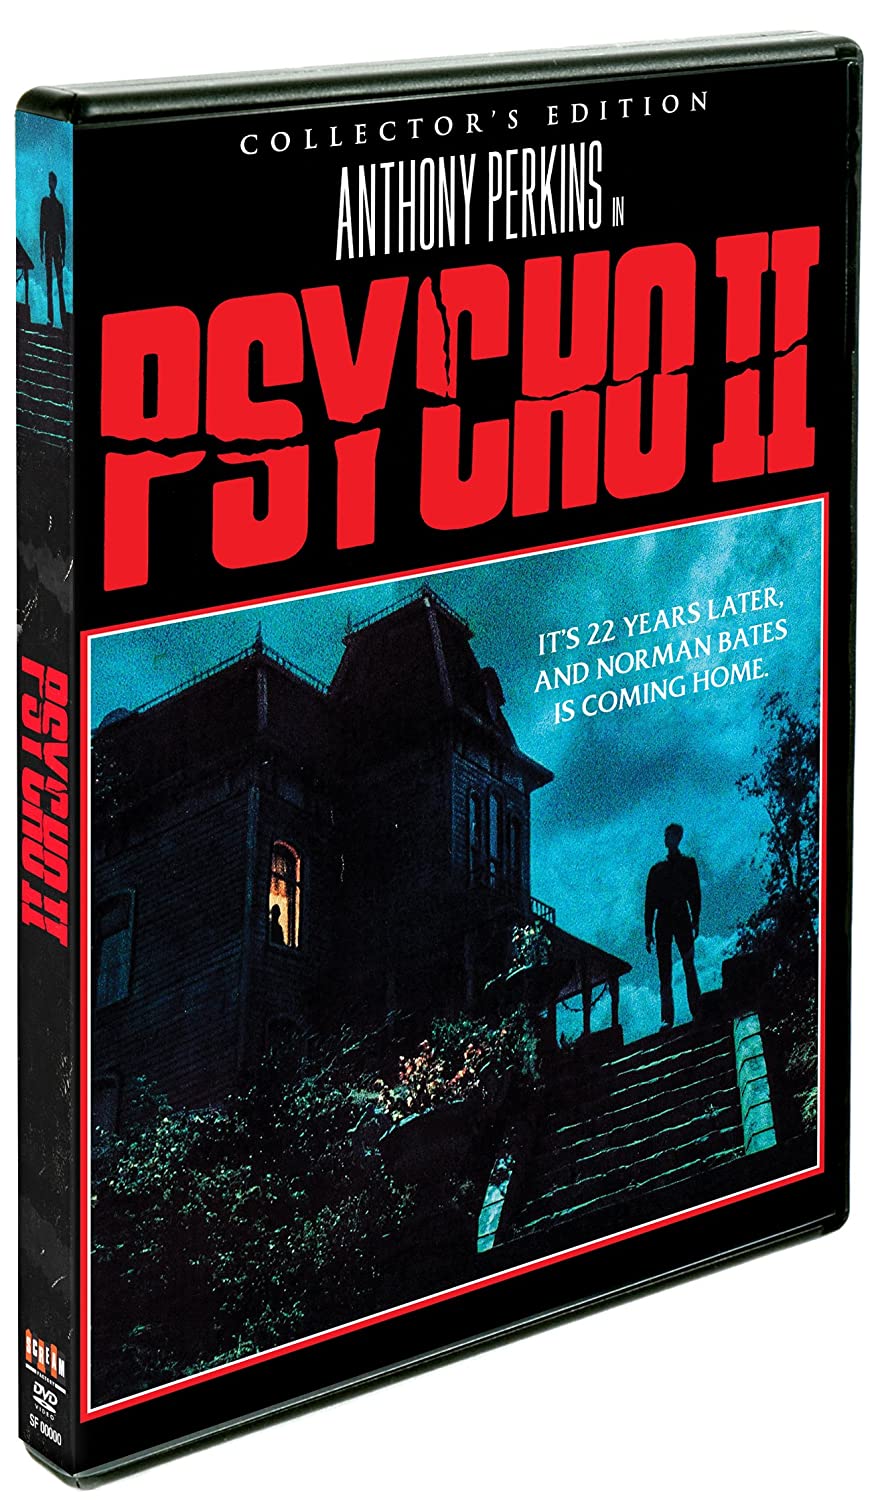 Psycho II (Collector's Edition) (DVD), Shout Factory, Horror - image 2 of 2